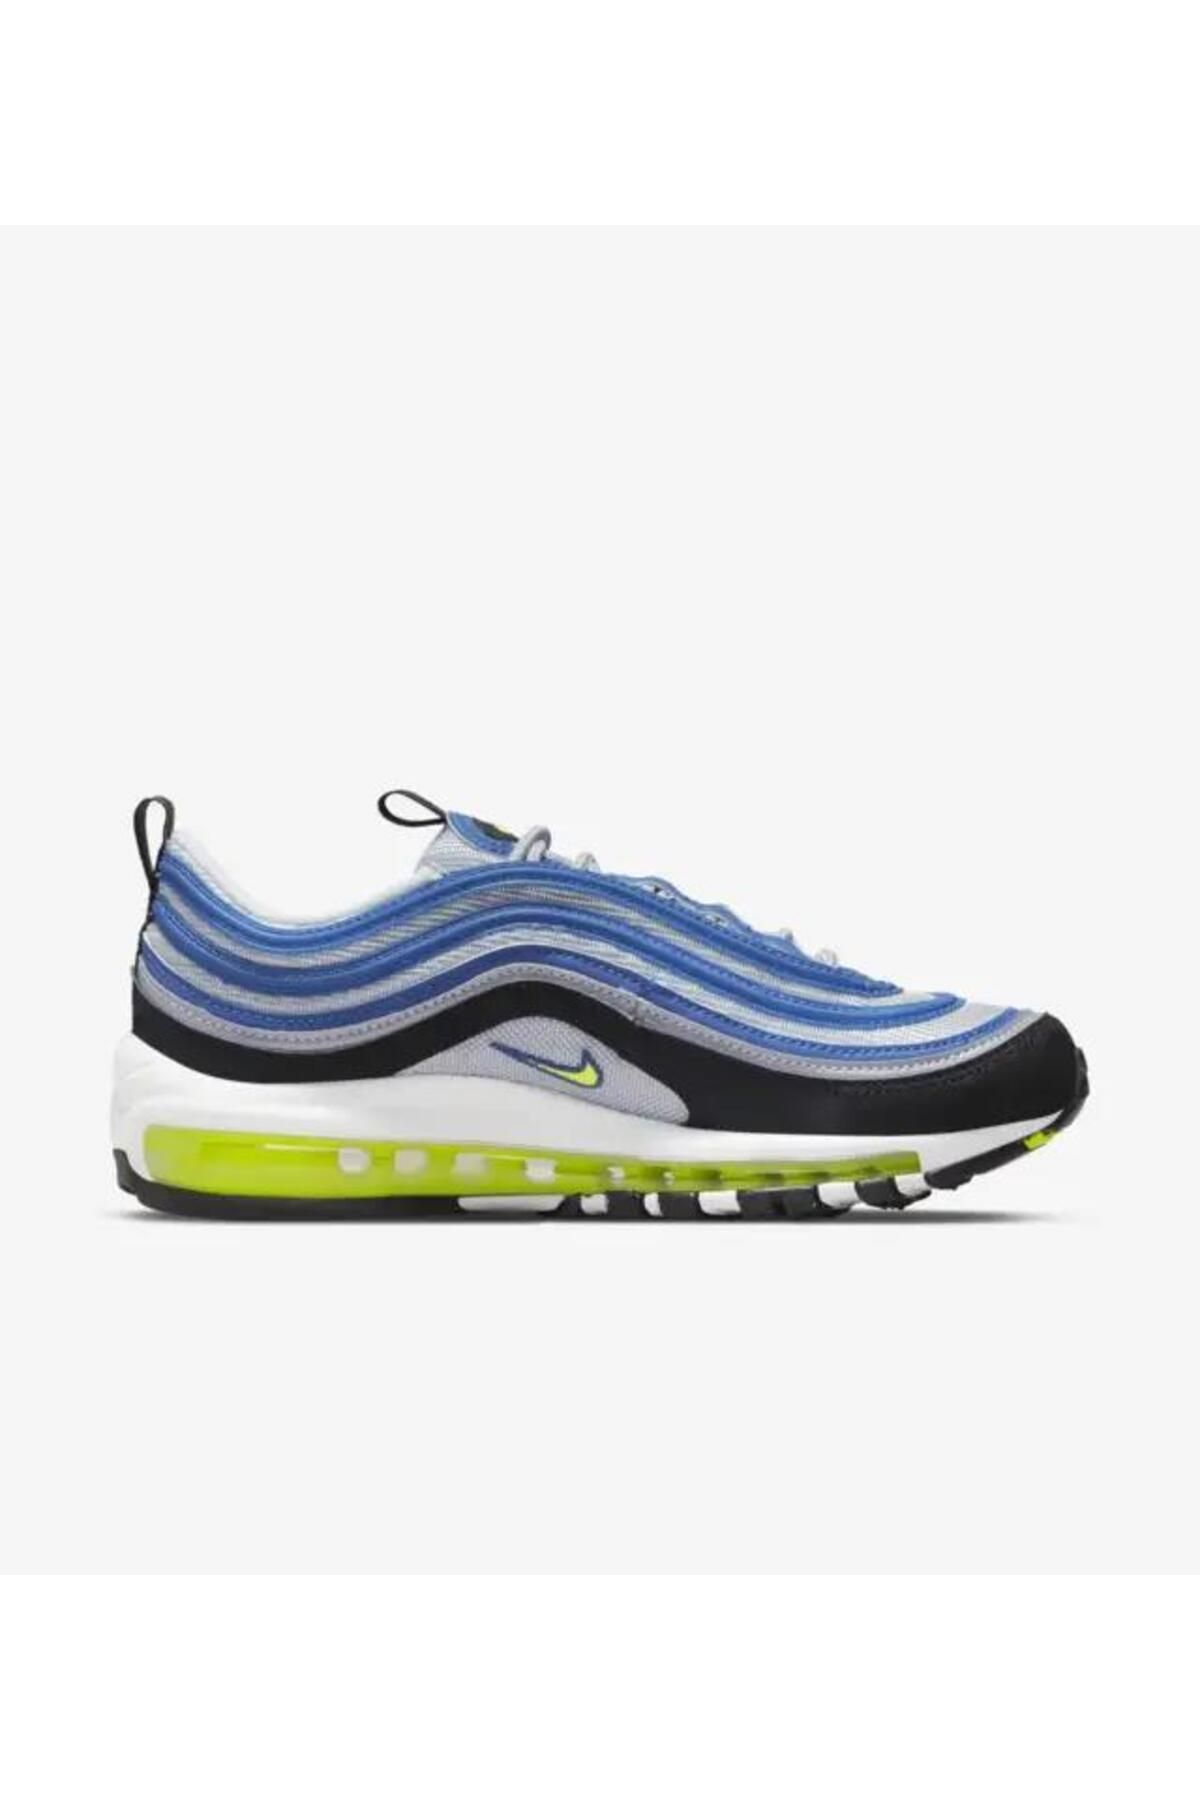 Nike Air Max 97 Atlantic Blue And Voltage Yellow Dq9131-400